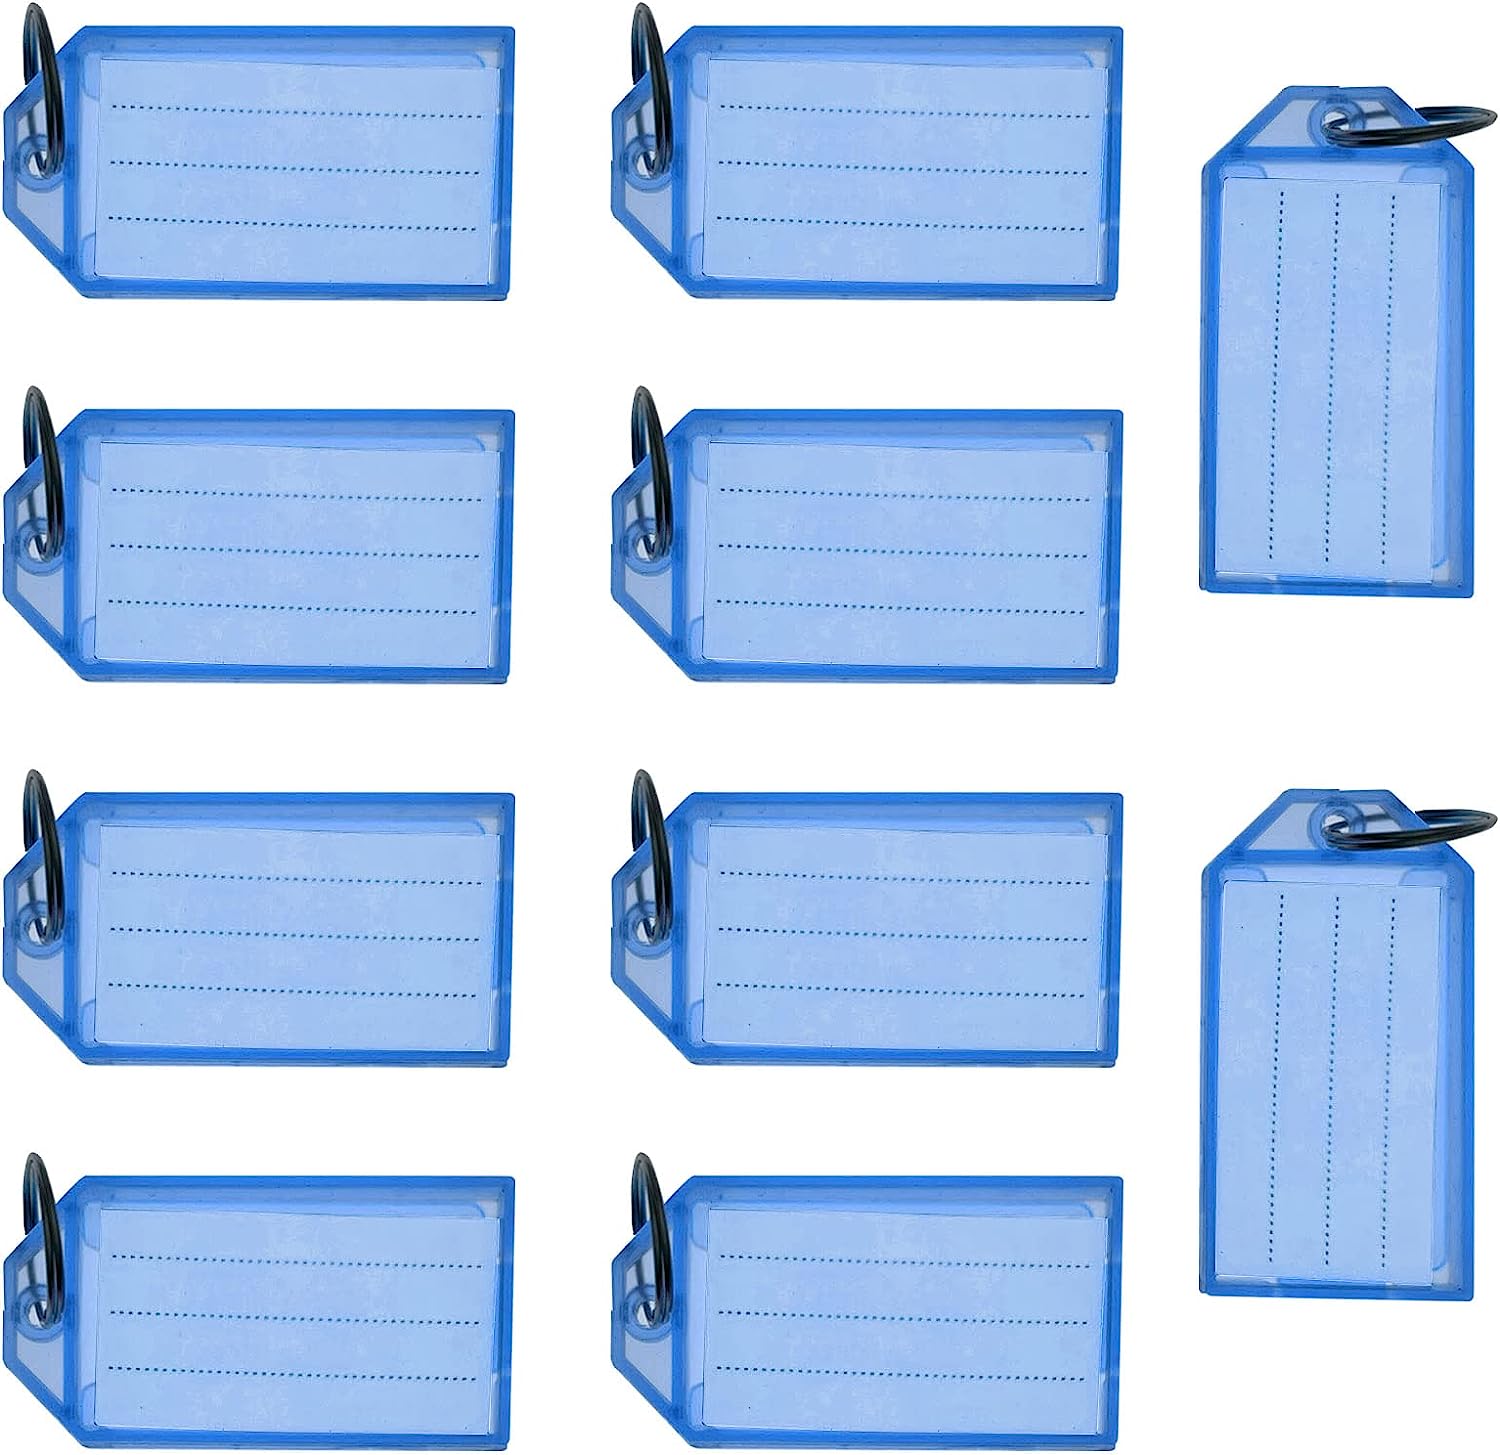 LuenHego Key Tags with Labels and Key Rings 10 Pack Blue RRP 4.49 CLEARANCE XL 2.99